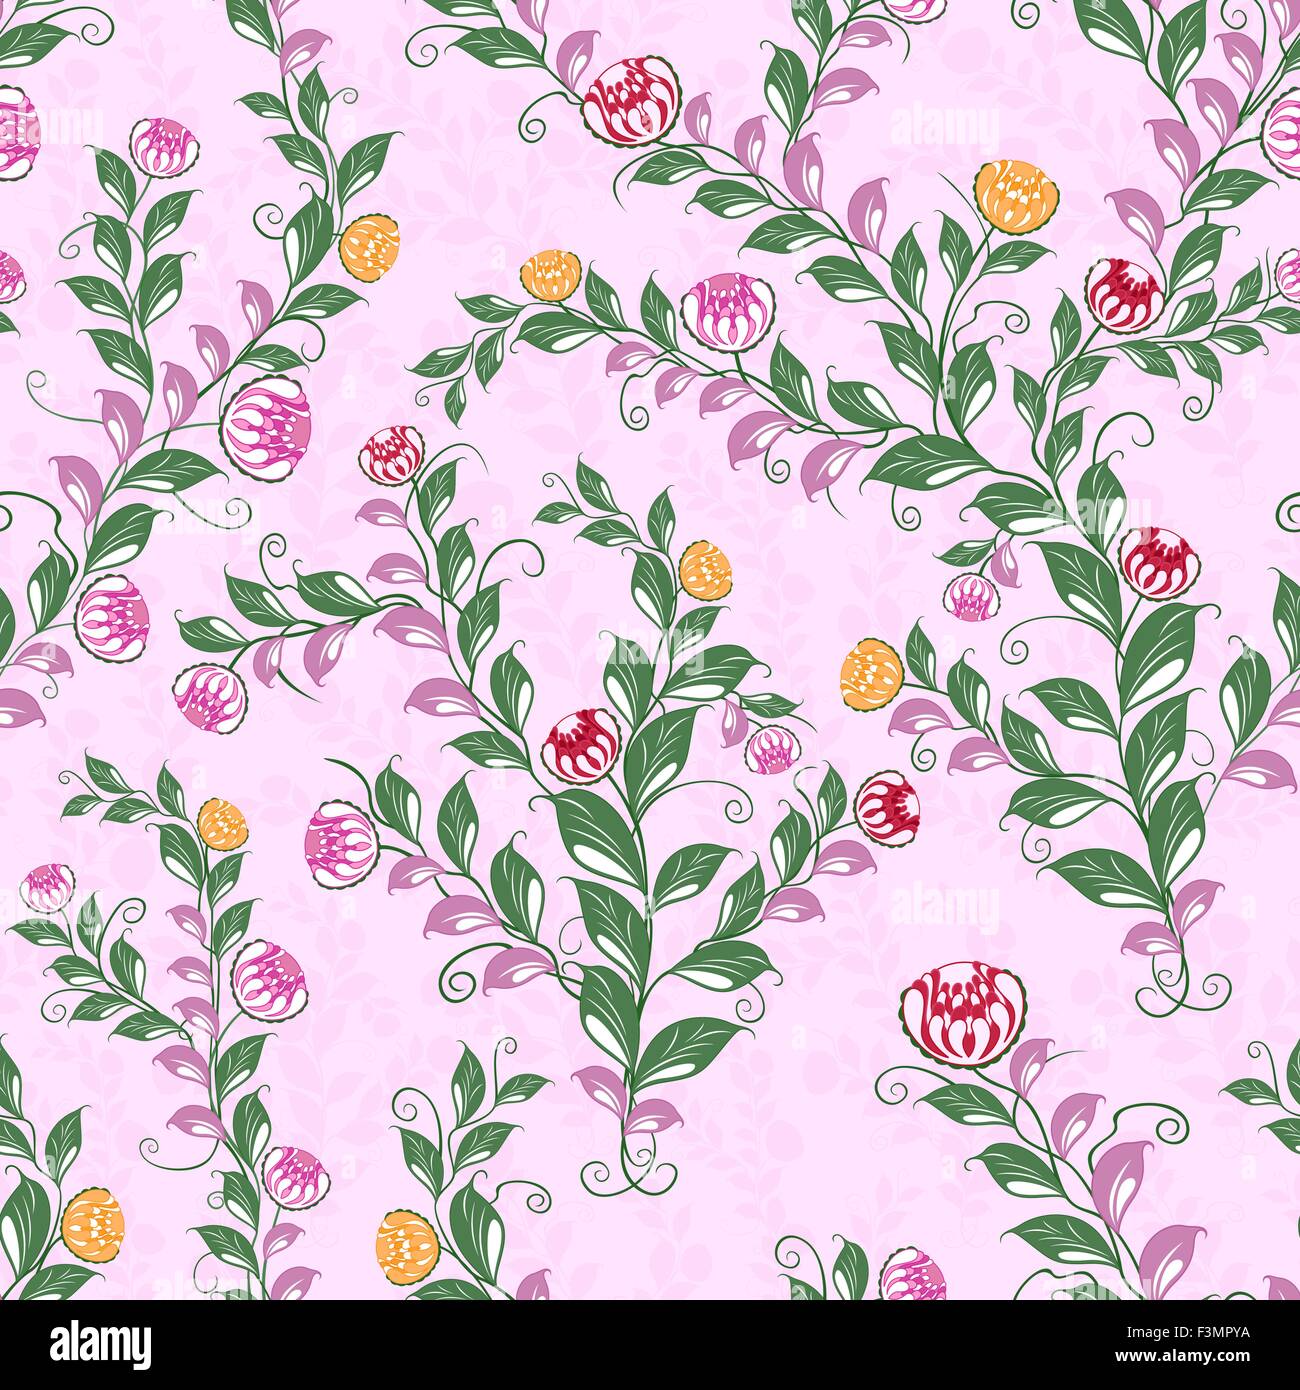 Floral seamless vector pattern with flowering plants, hand drawing illustration Stock Vector